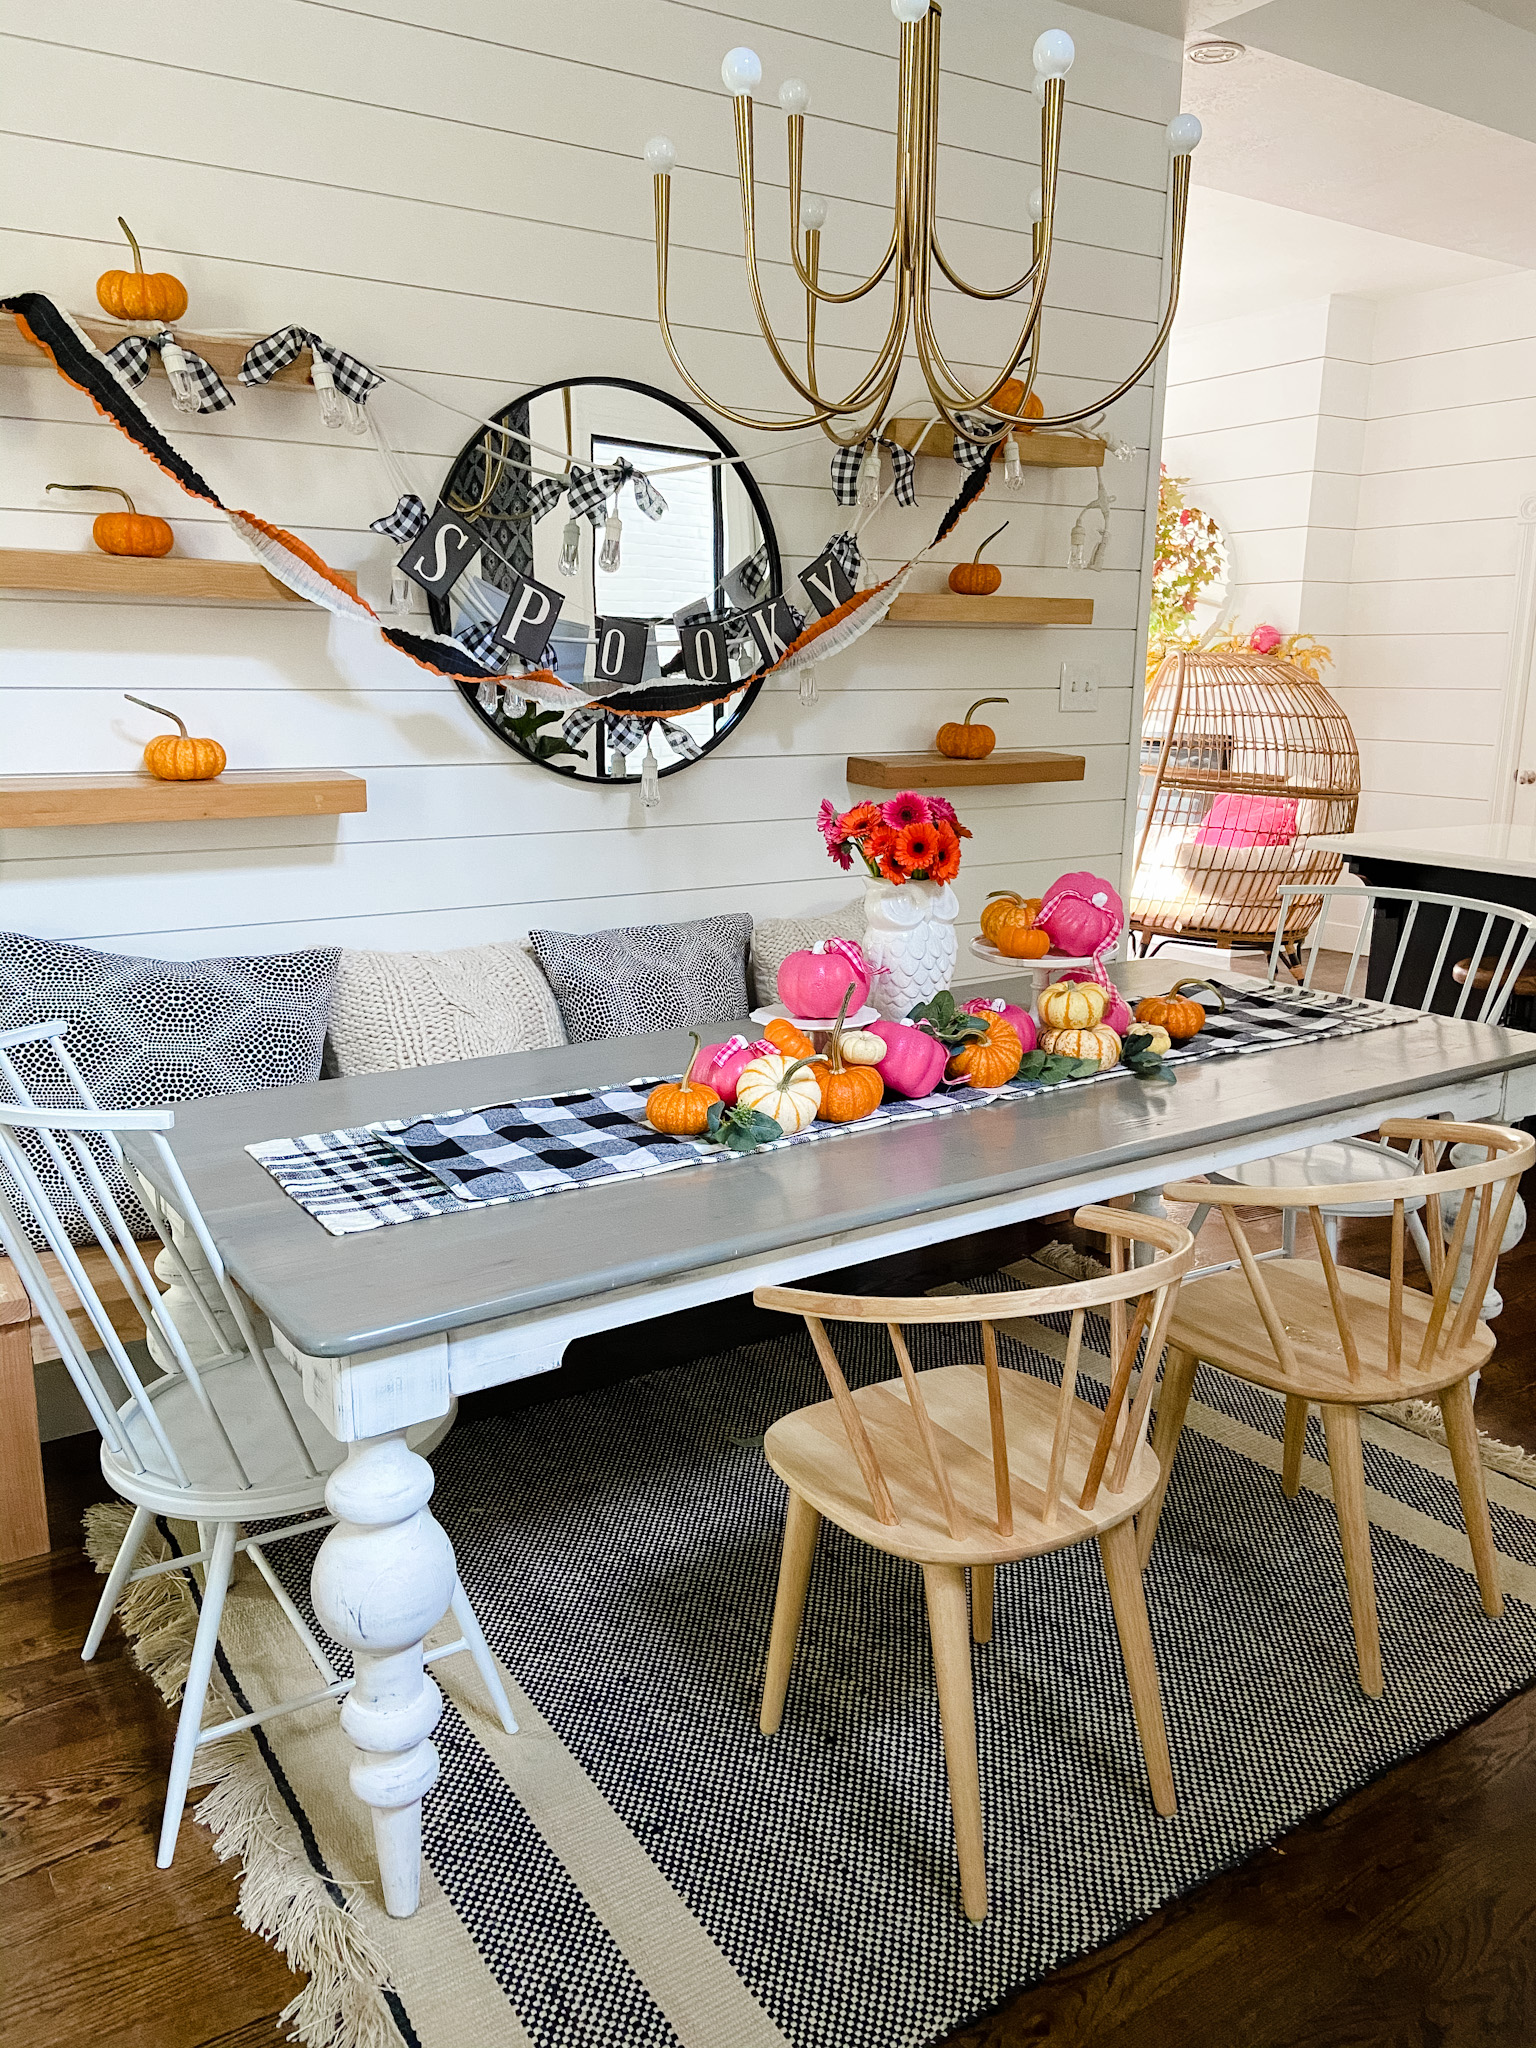 Ways to Bring Color into Your Cottage Home for Fall. Bring BRIGHT colors into your Fall home with colorful accessories, rugs and natural elements! 